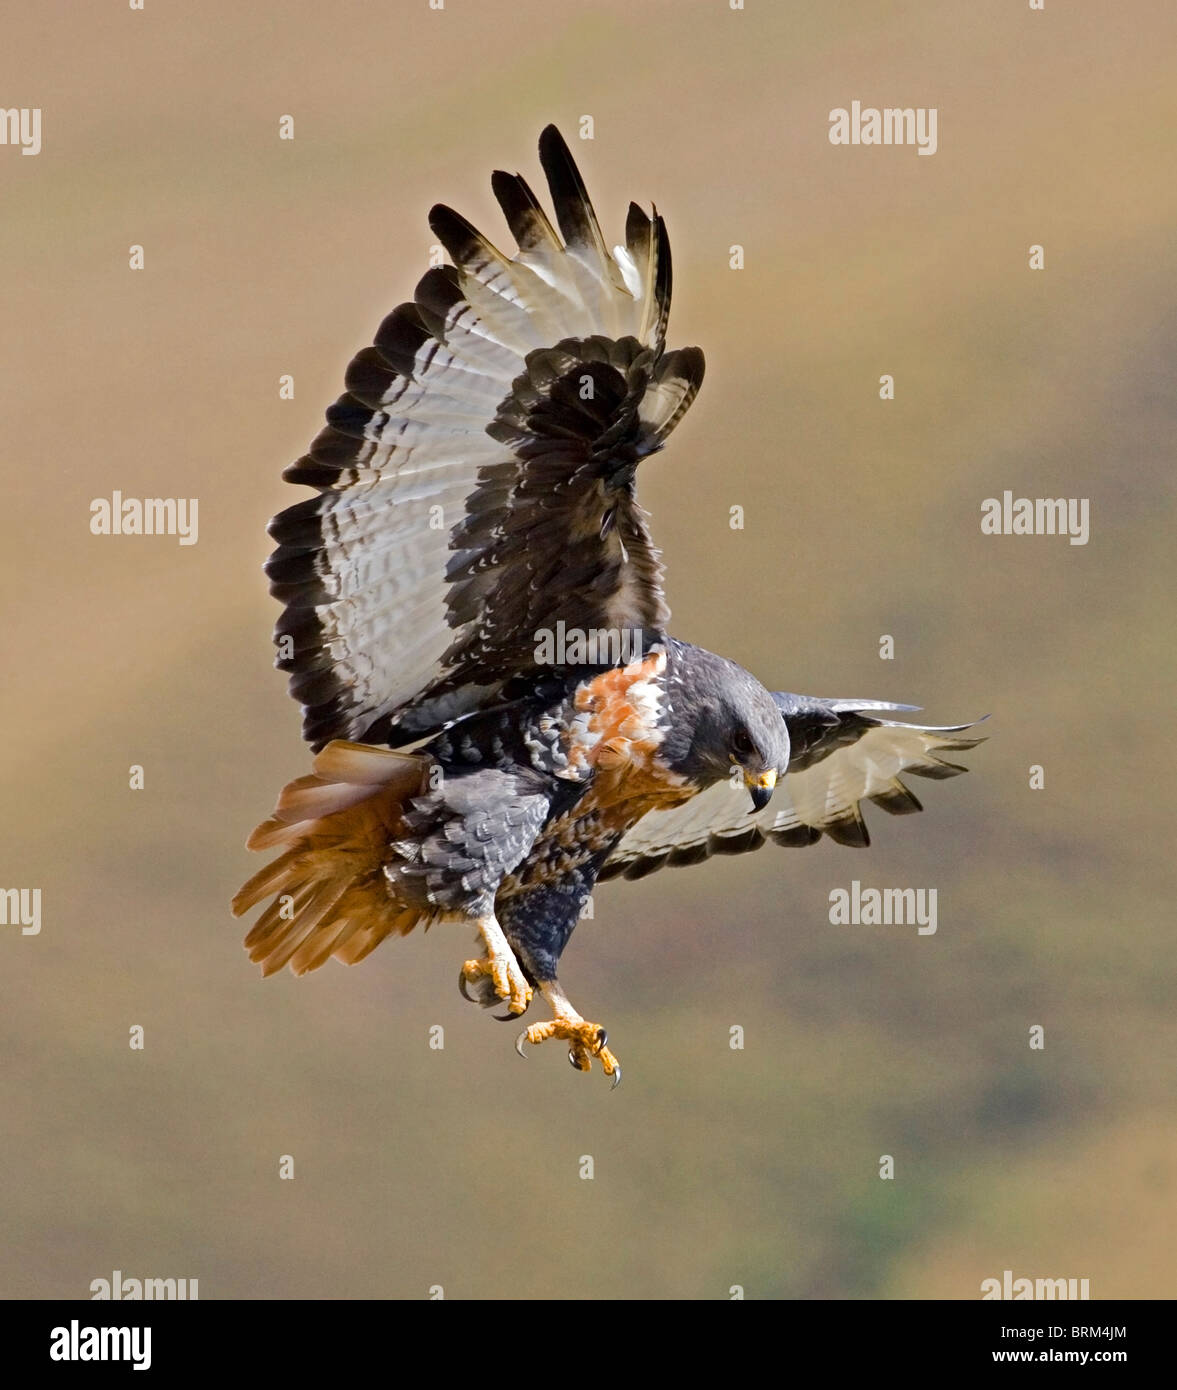 Jackal buzzard coming in to land Stock Photo